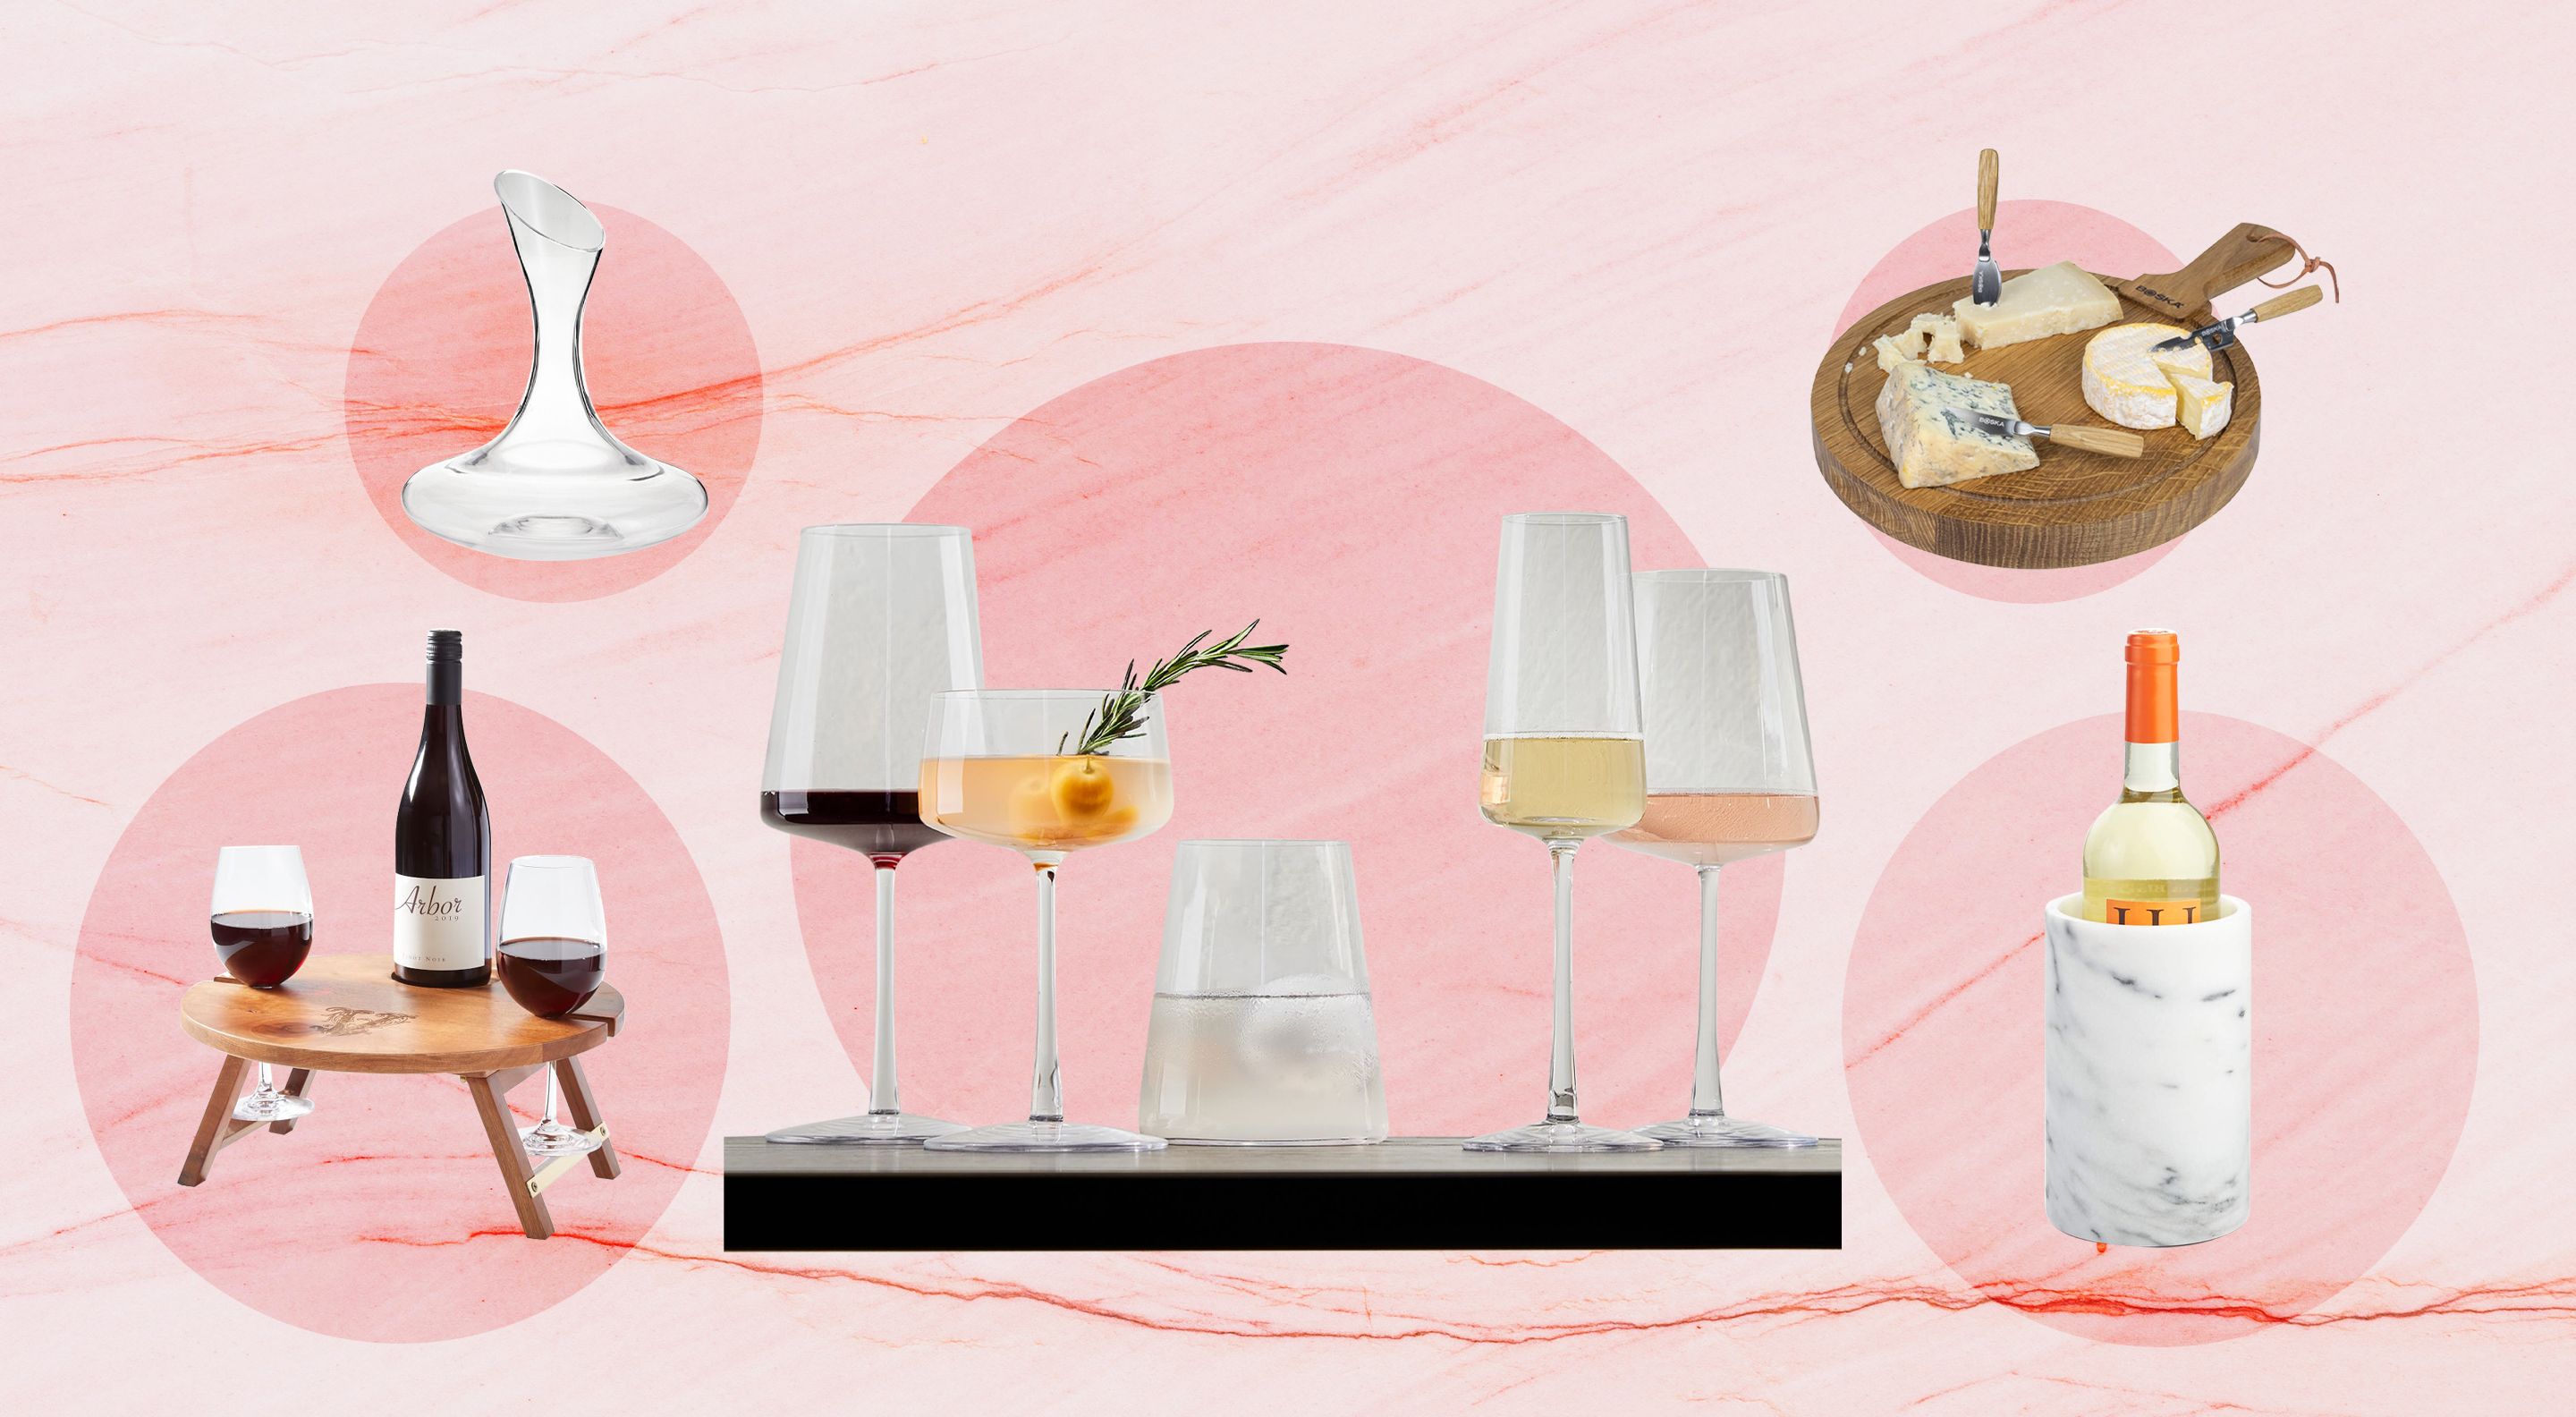 The 12 Best Gifts for Wine Lovers in Your Life